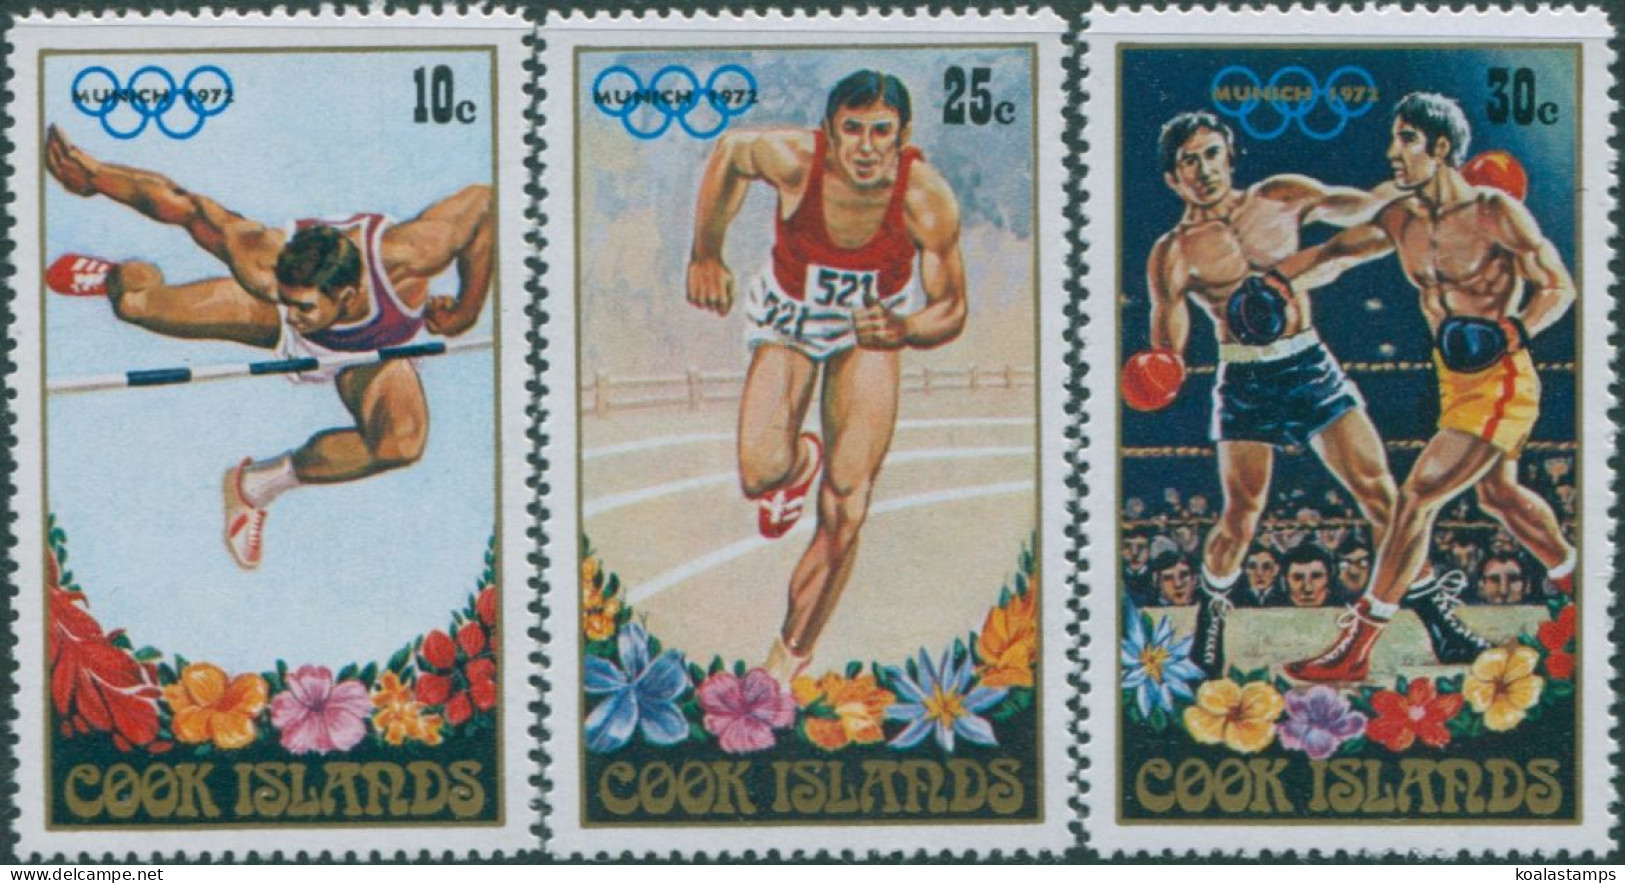 Cook Islands 1972 SG401-403 Olympic Games MNH - Cook